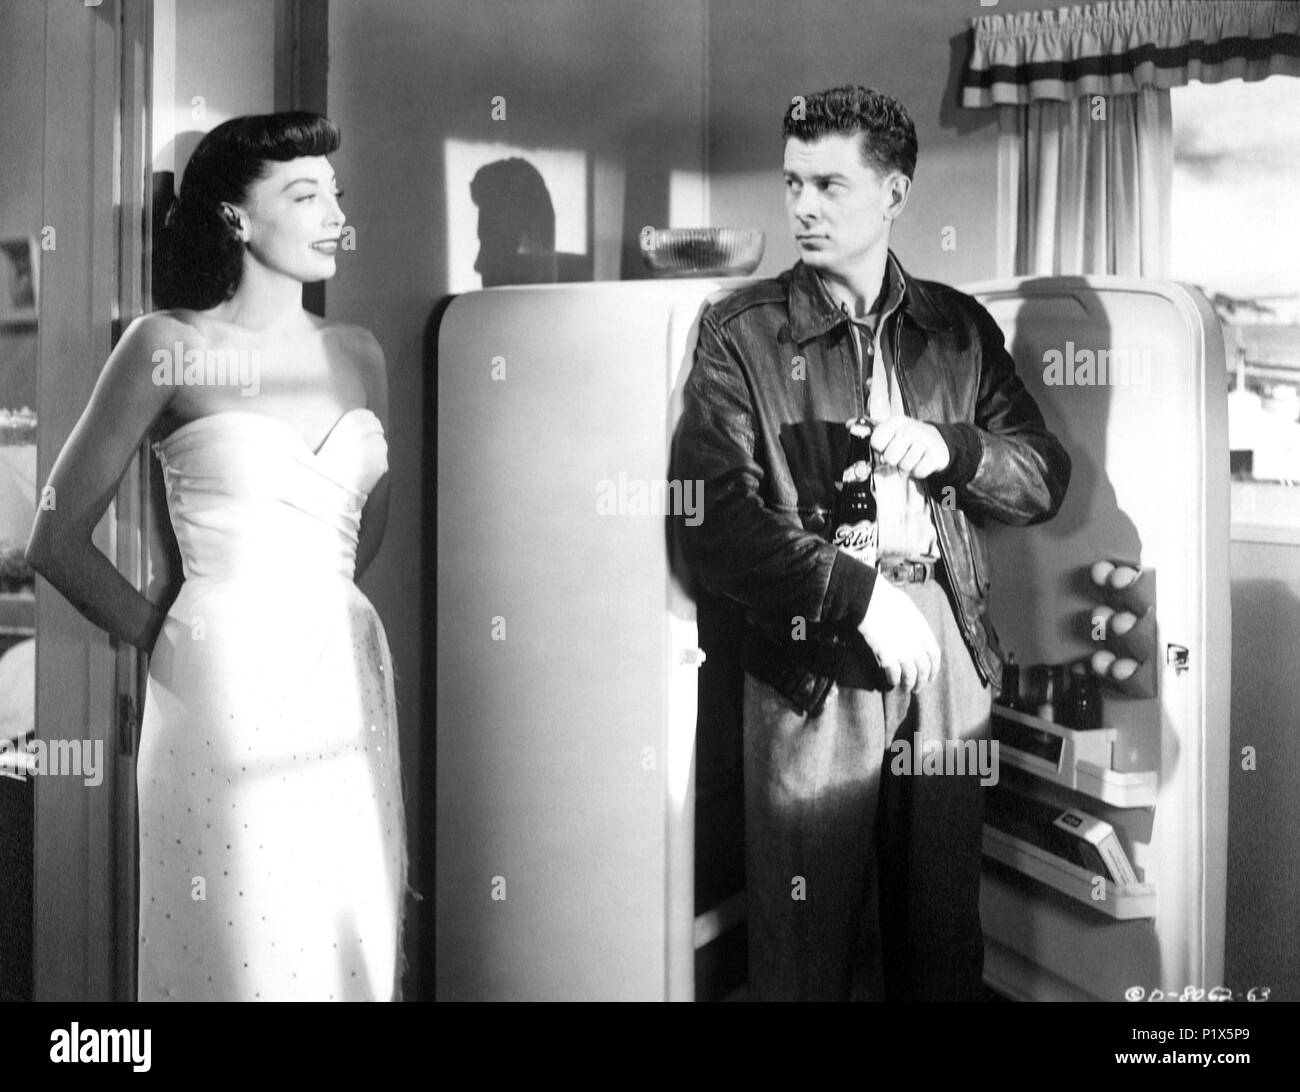 Original Film Title: THE SNIPER.  English Title: THE SNIPER.  Film Director: EDWARD DMYTRYK.  Year: 1952.  Stars: MARIE WINDSOR; ARTHUR FRANZ. Credit: COLUMBIA PICTURES / Album Stock Photo